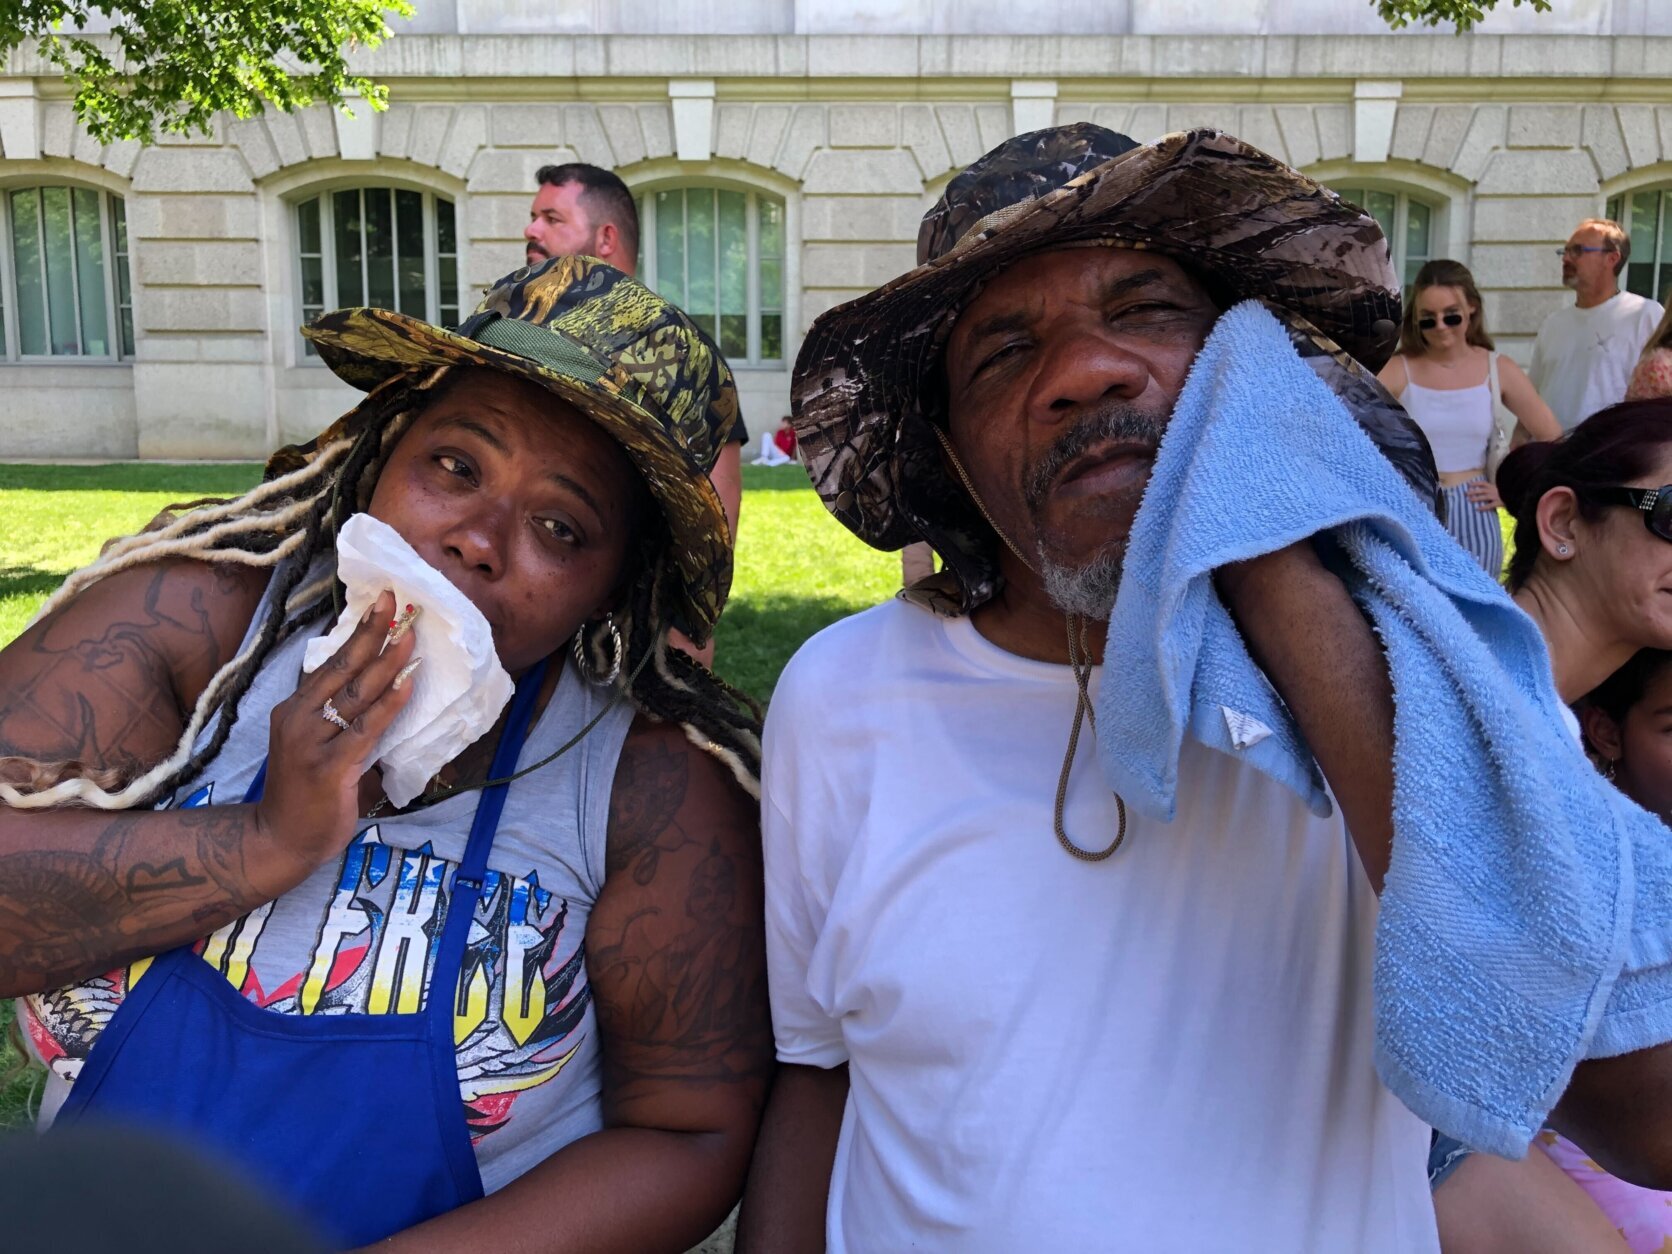 Nicole and Ernest Lawrence of D.C. also braved the heat for Monday's parade.